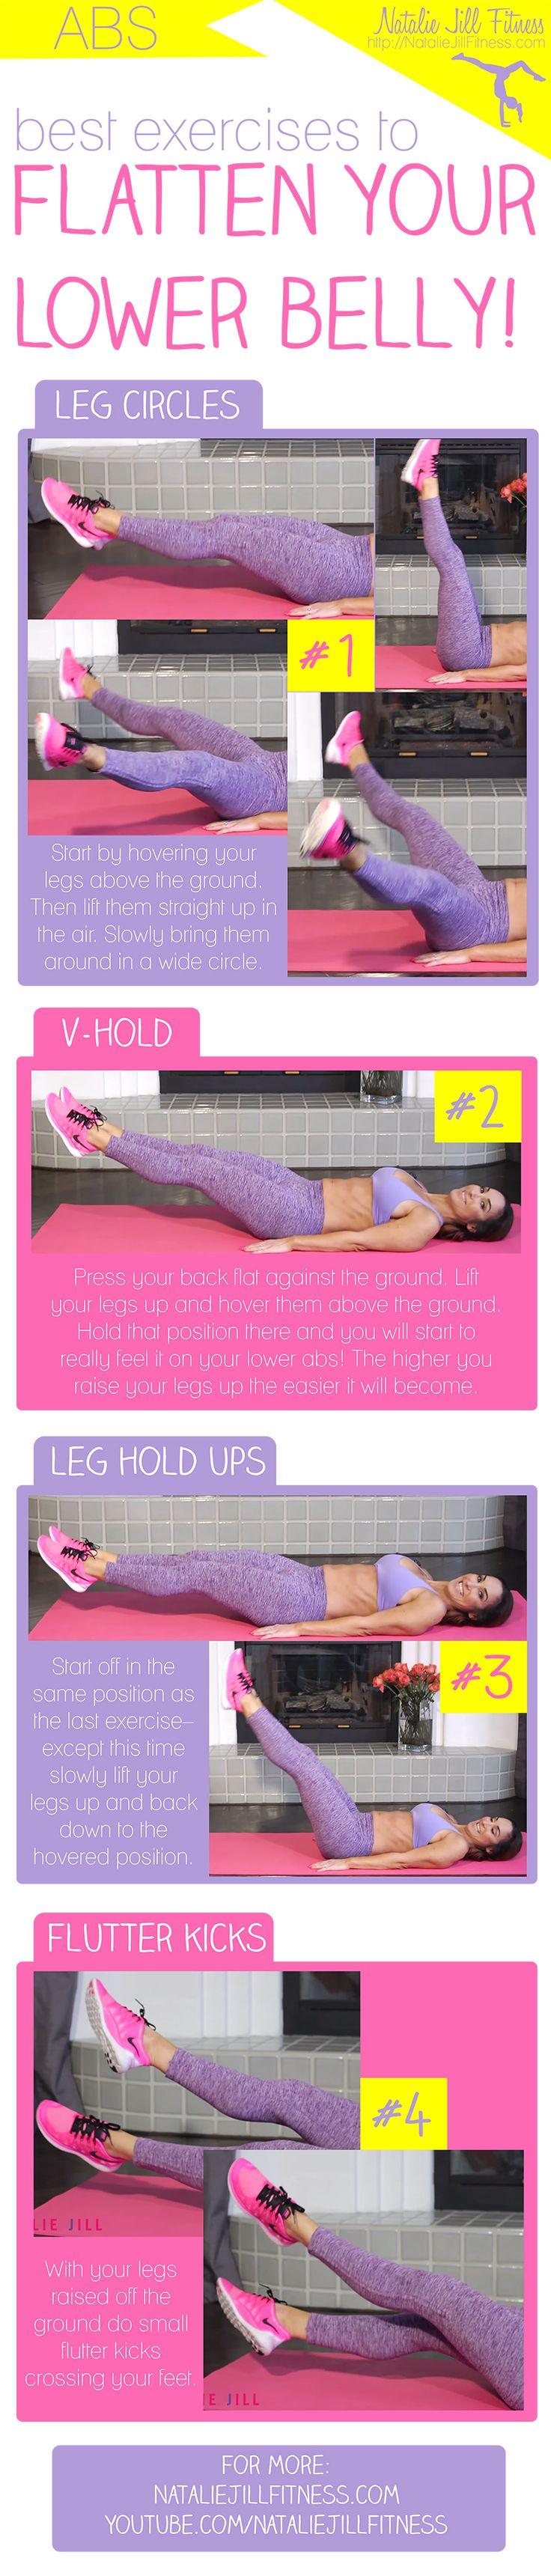 Wedding - Printable Workout Cards From Natalie Jill Fitness